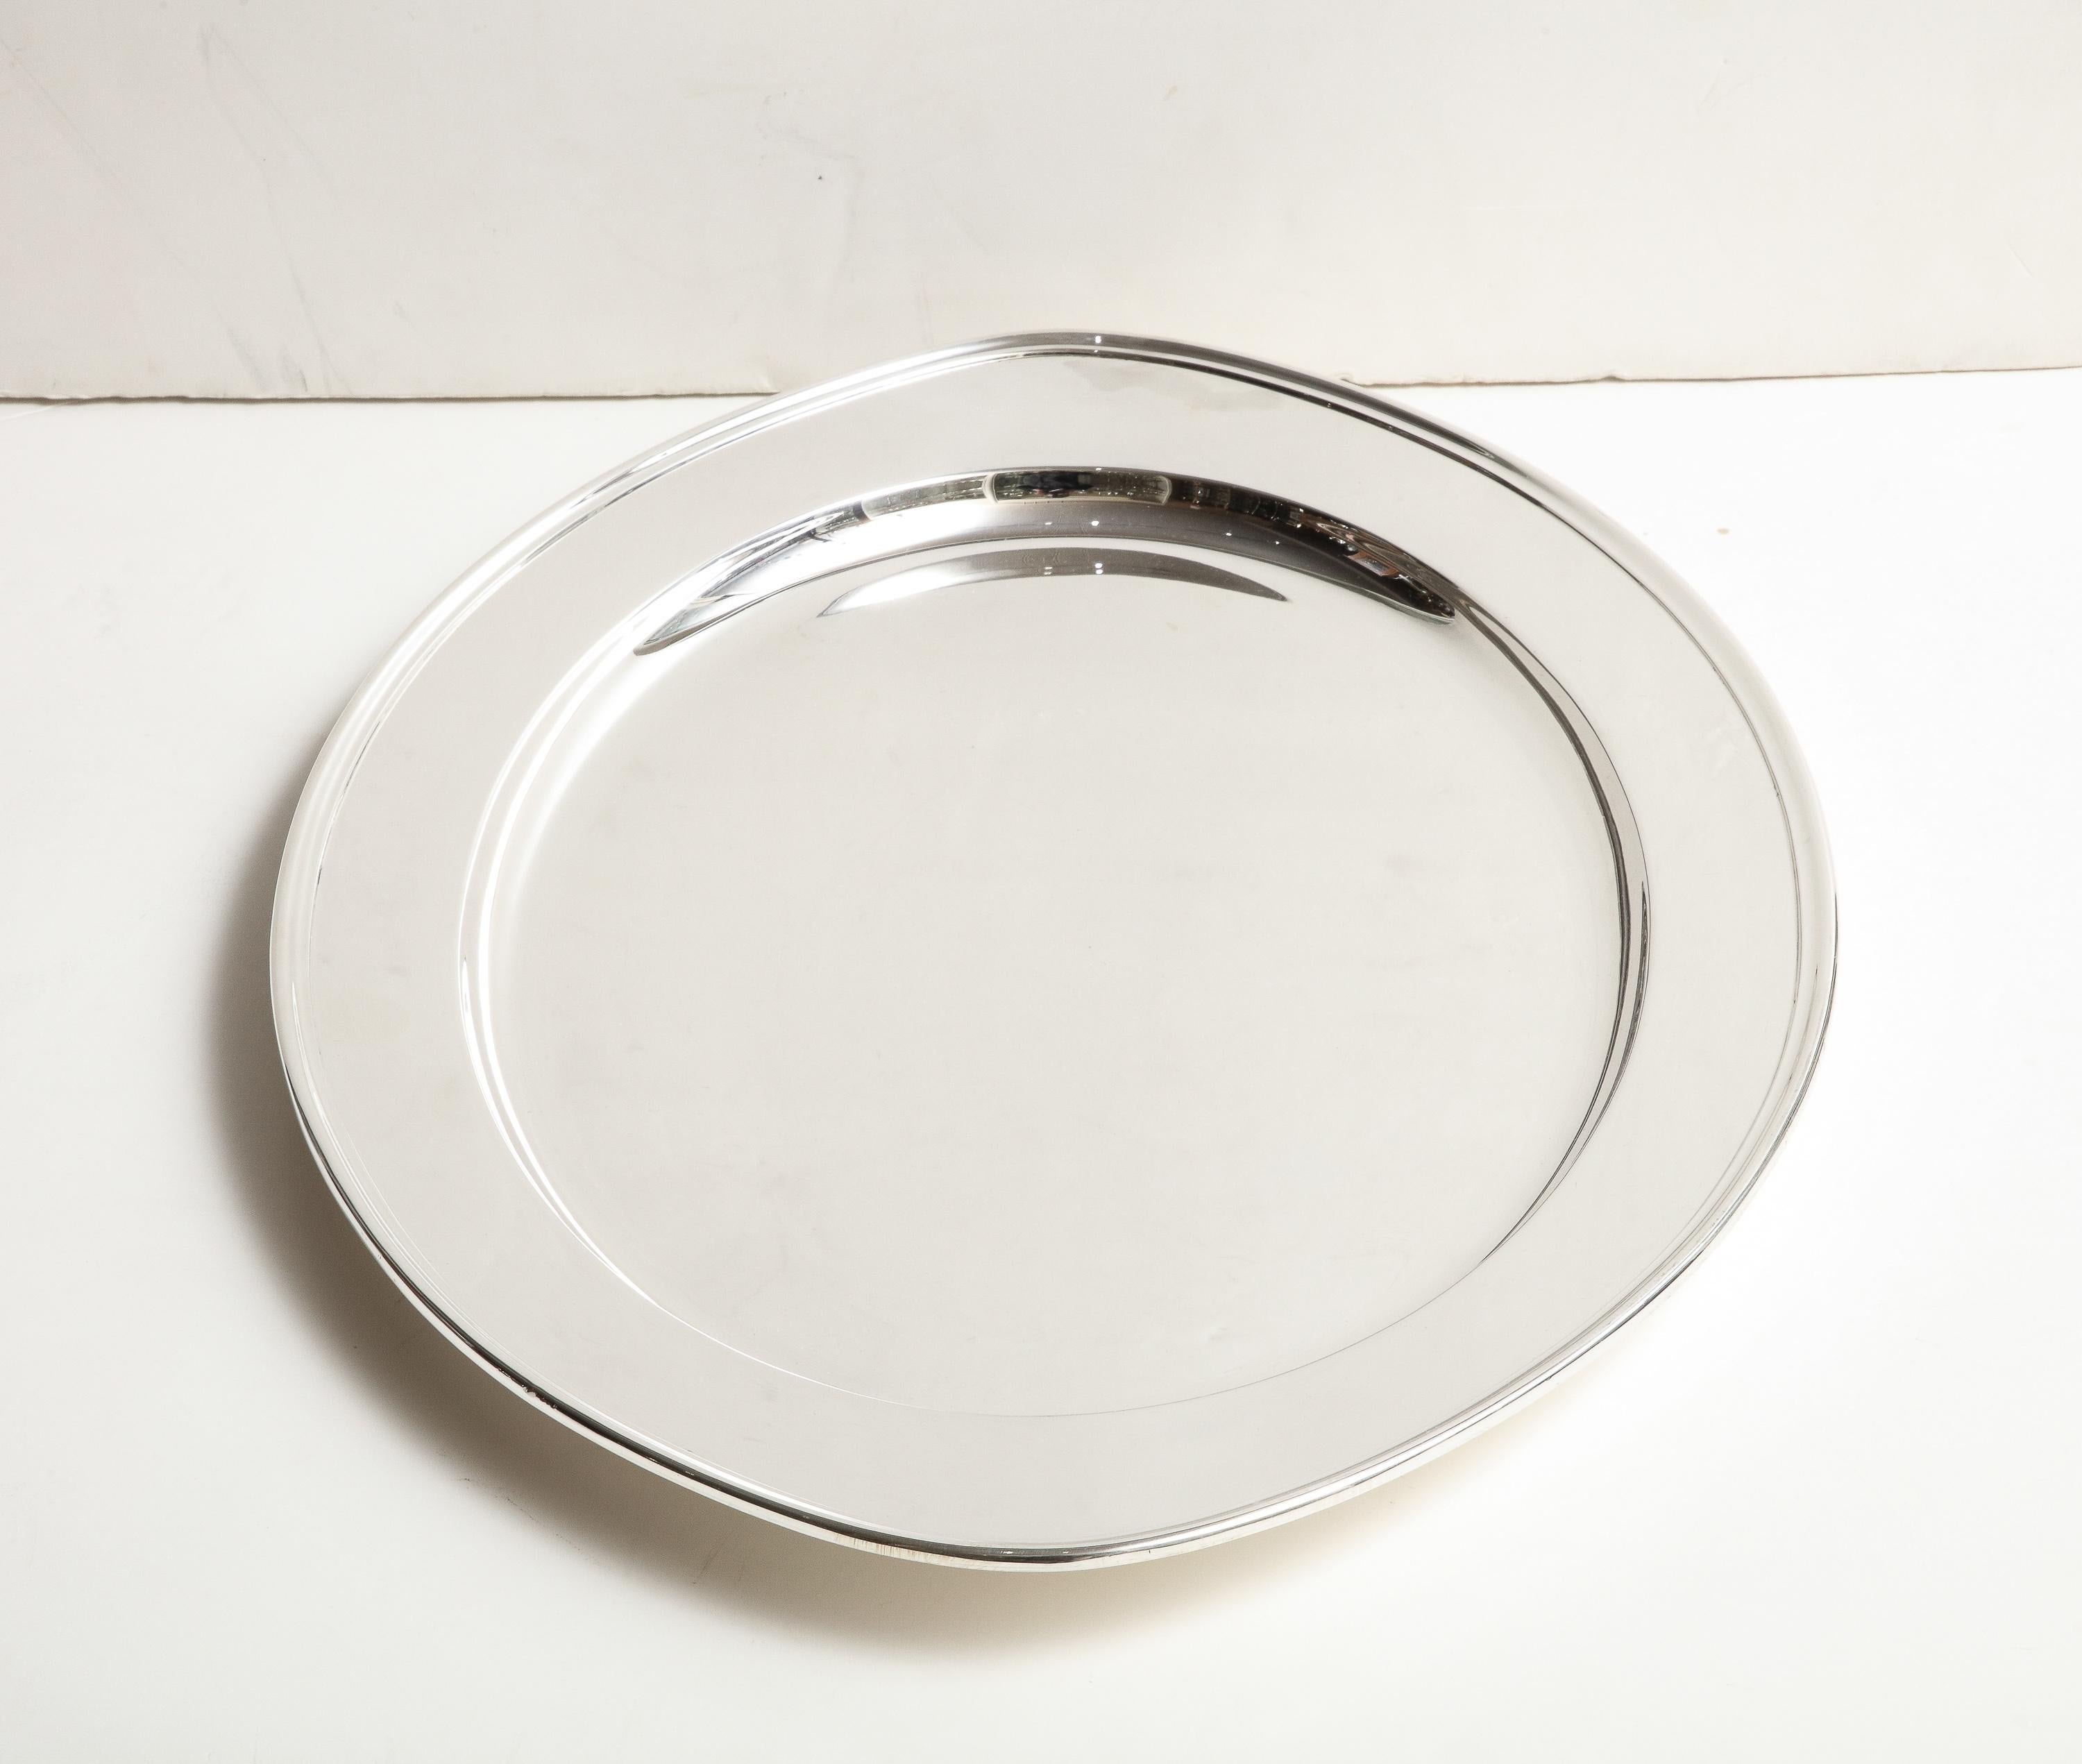 Very Large Art Deco Period Solid Sterling Silver Serving Platter/Tray by Gorham For Sale 2